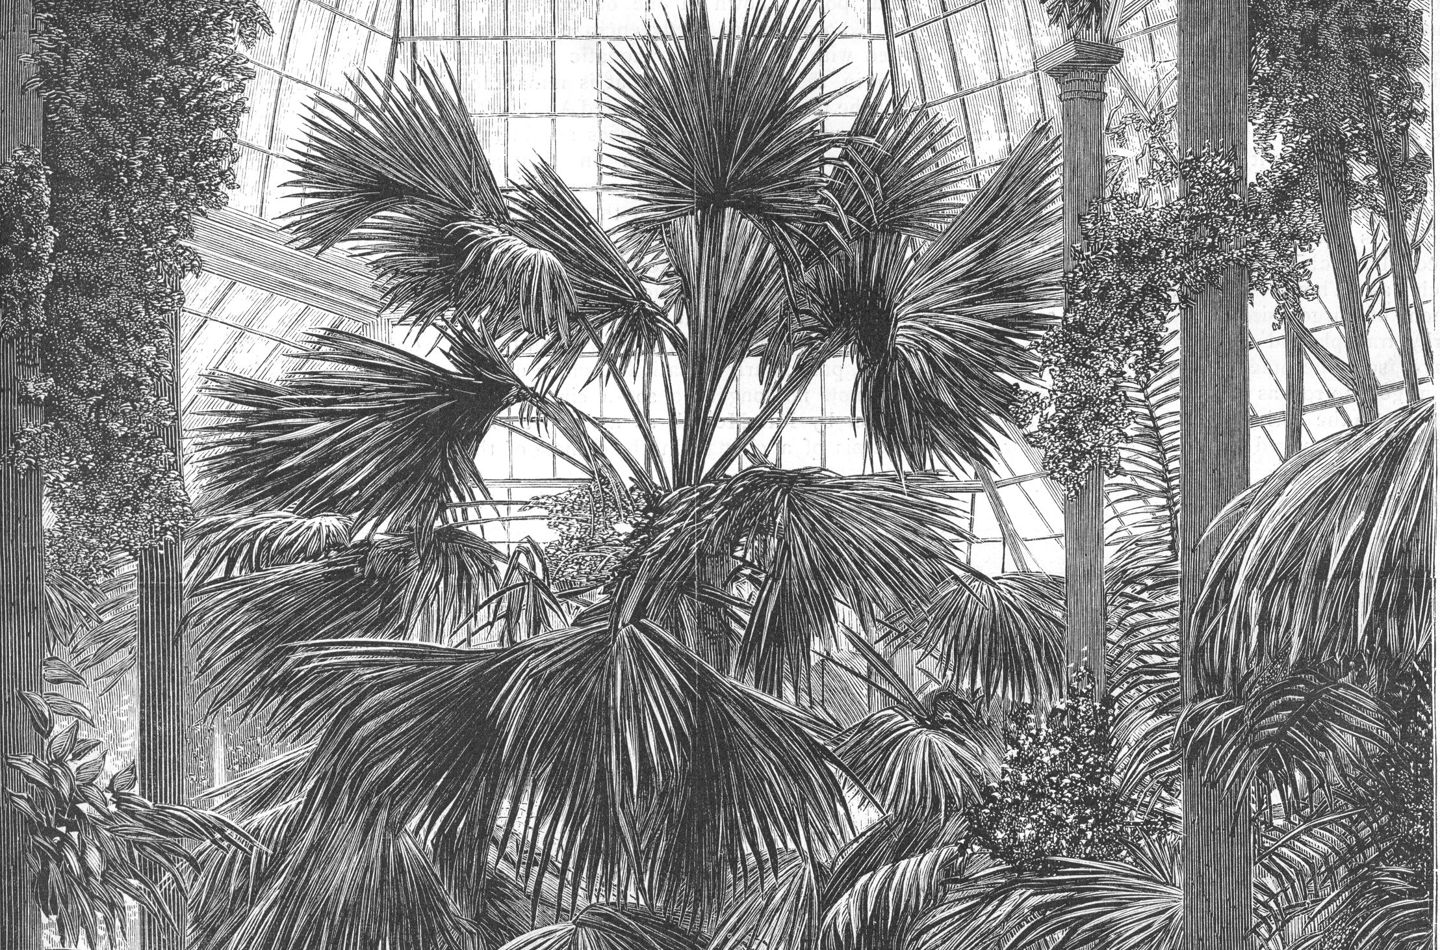 Detailed illustration of a grand, lush palm house conservatory filled with towering palms, streaming light, and a lone figure amidst the greenery.